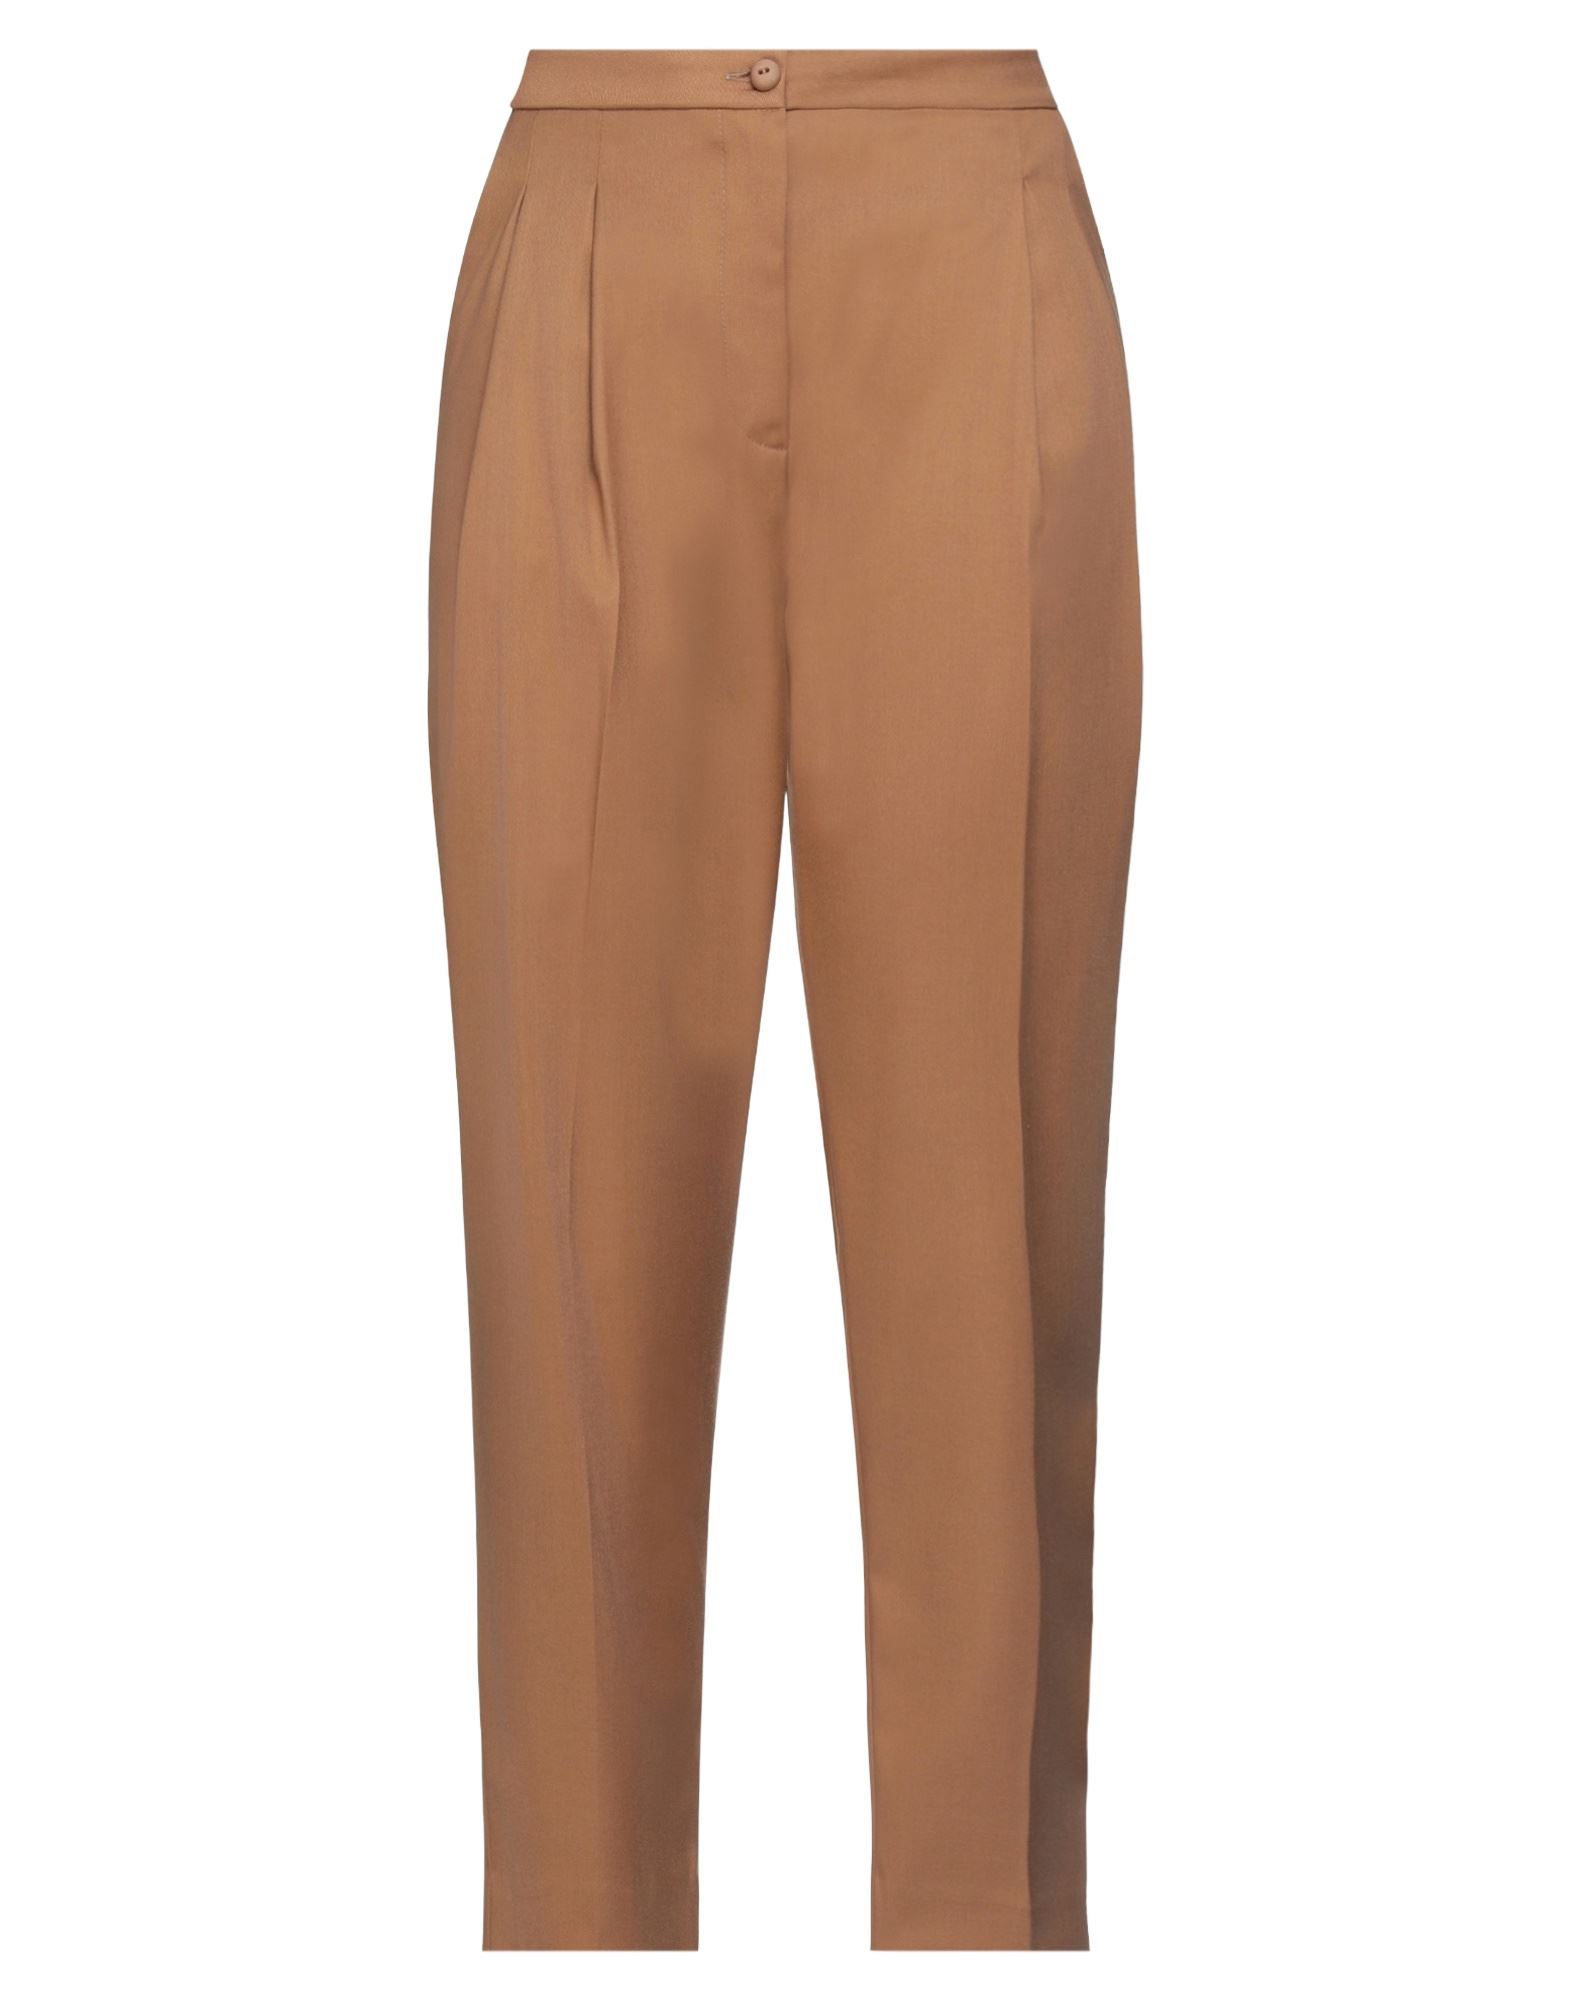 Nora Barth Pants In Camel